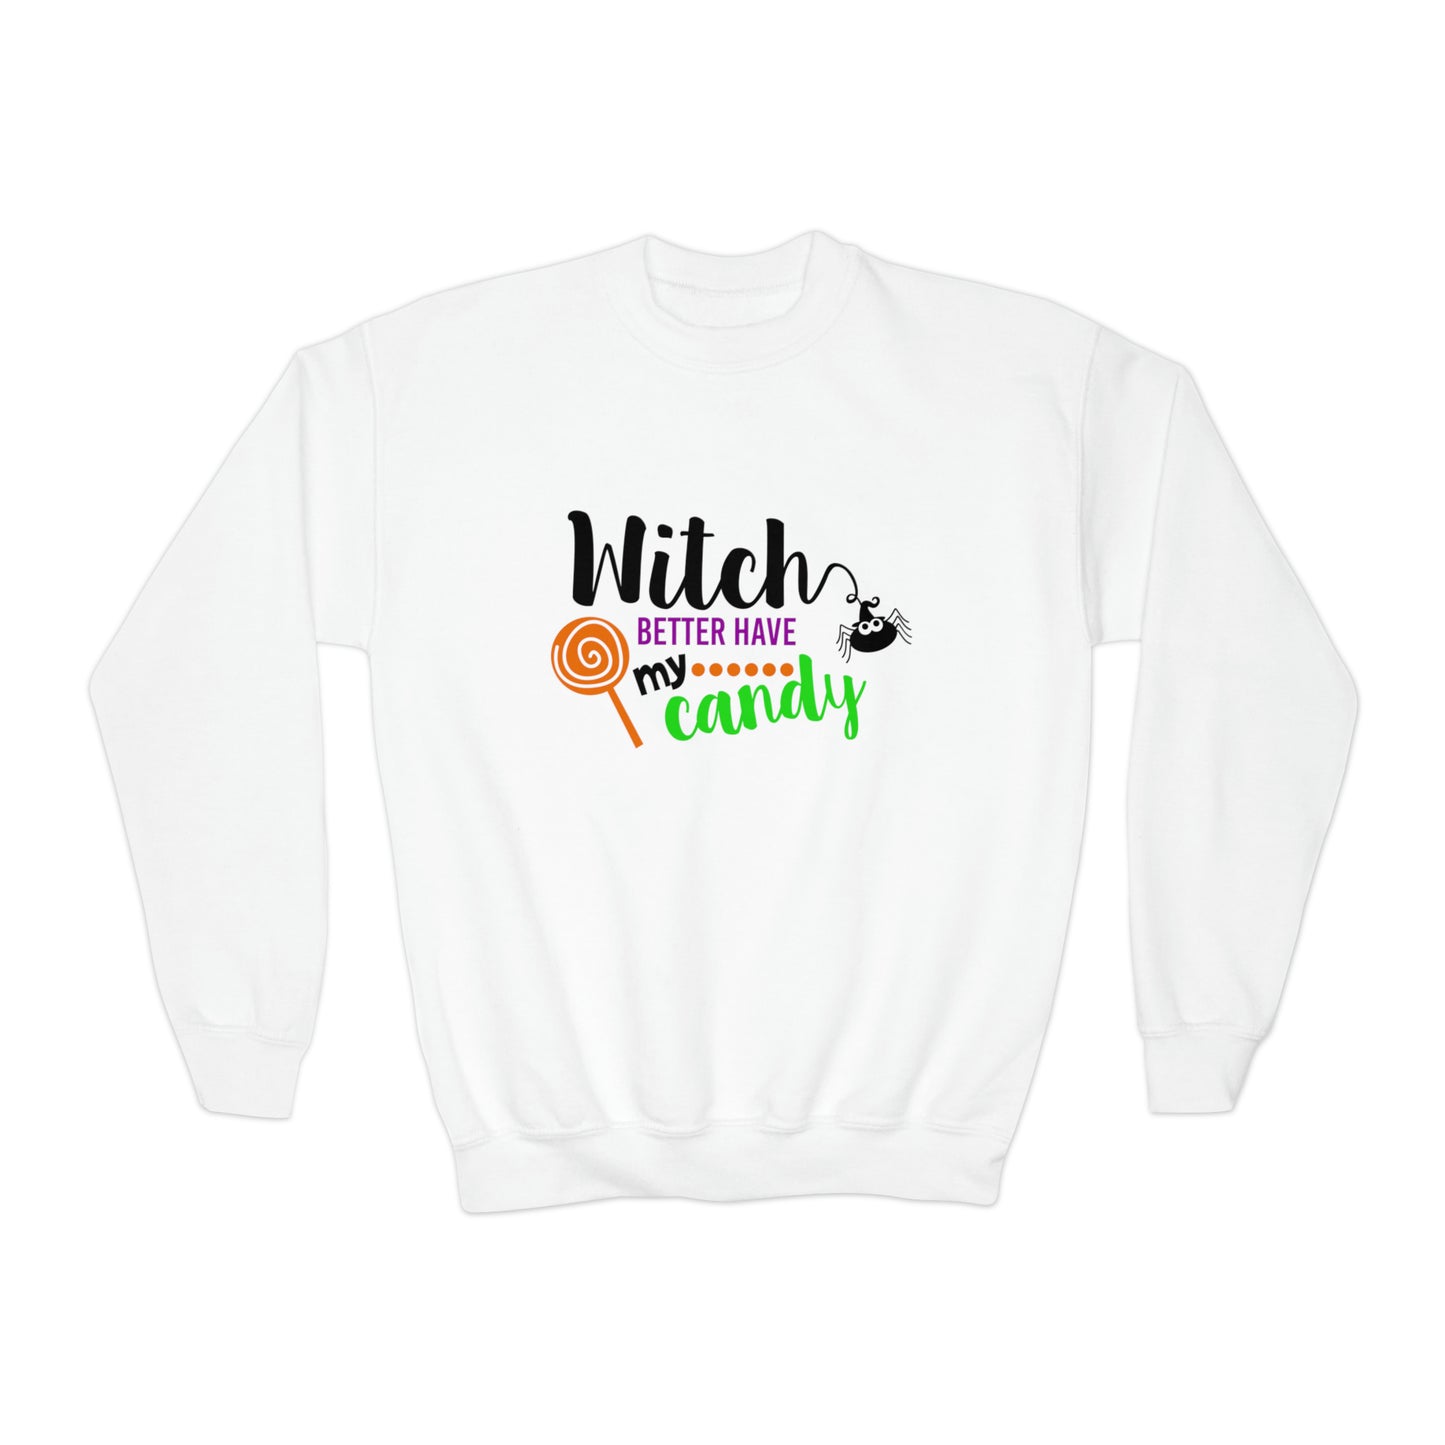 Girls Witch Better Have My Candy Sweatshirt